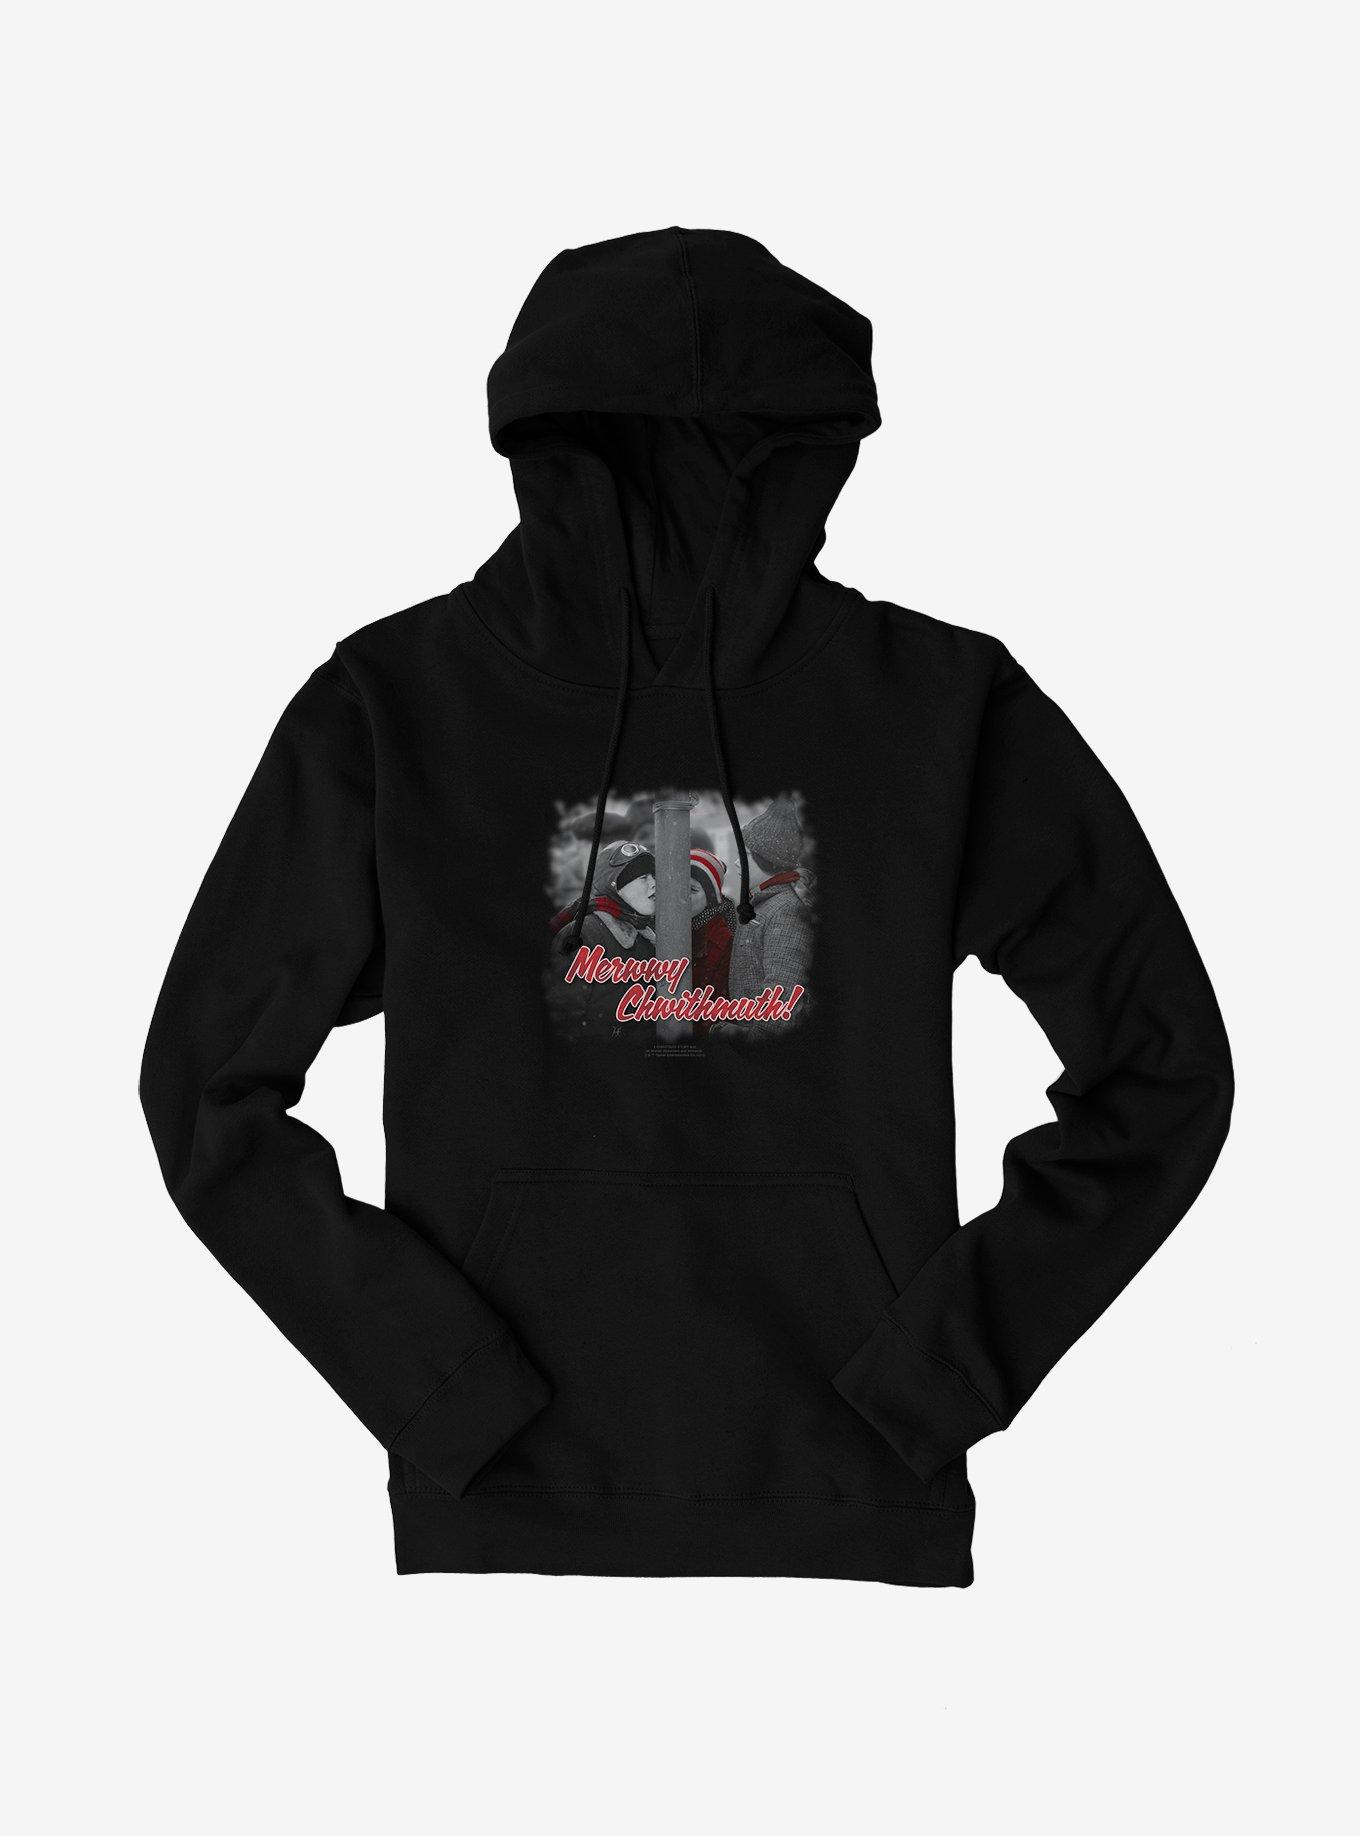 A Christmas Story Merwwy Chwithmuth Hoodie